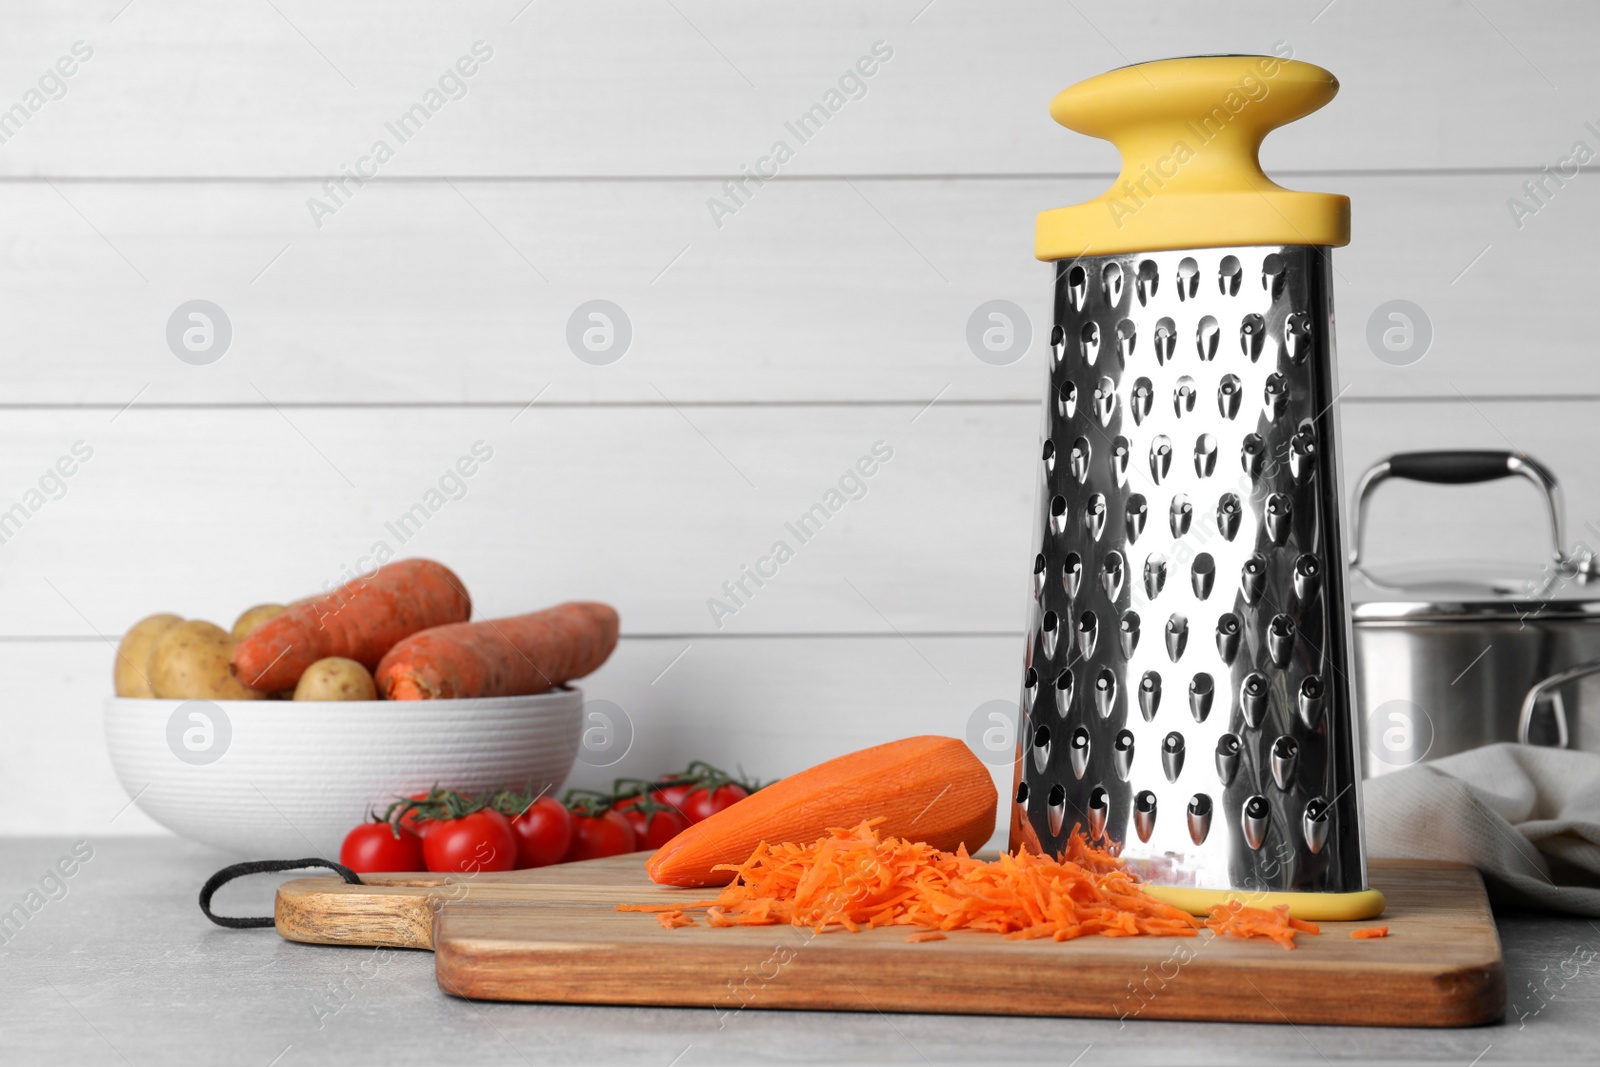 Photo of Grater and fresh ripe vegetables on table